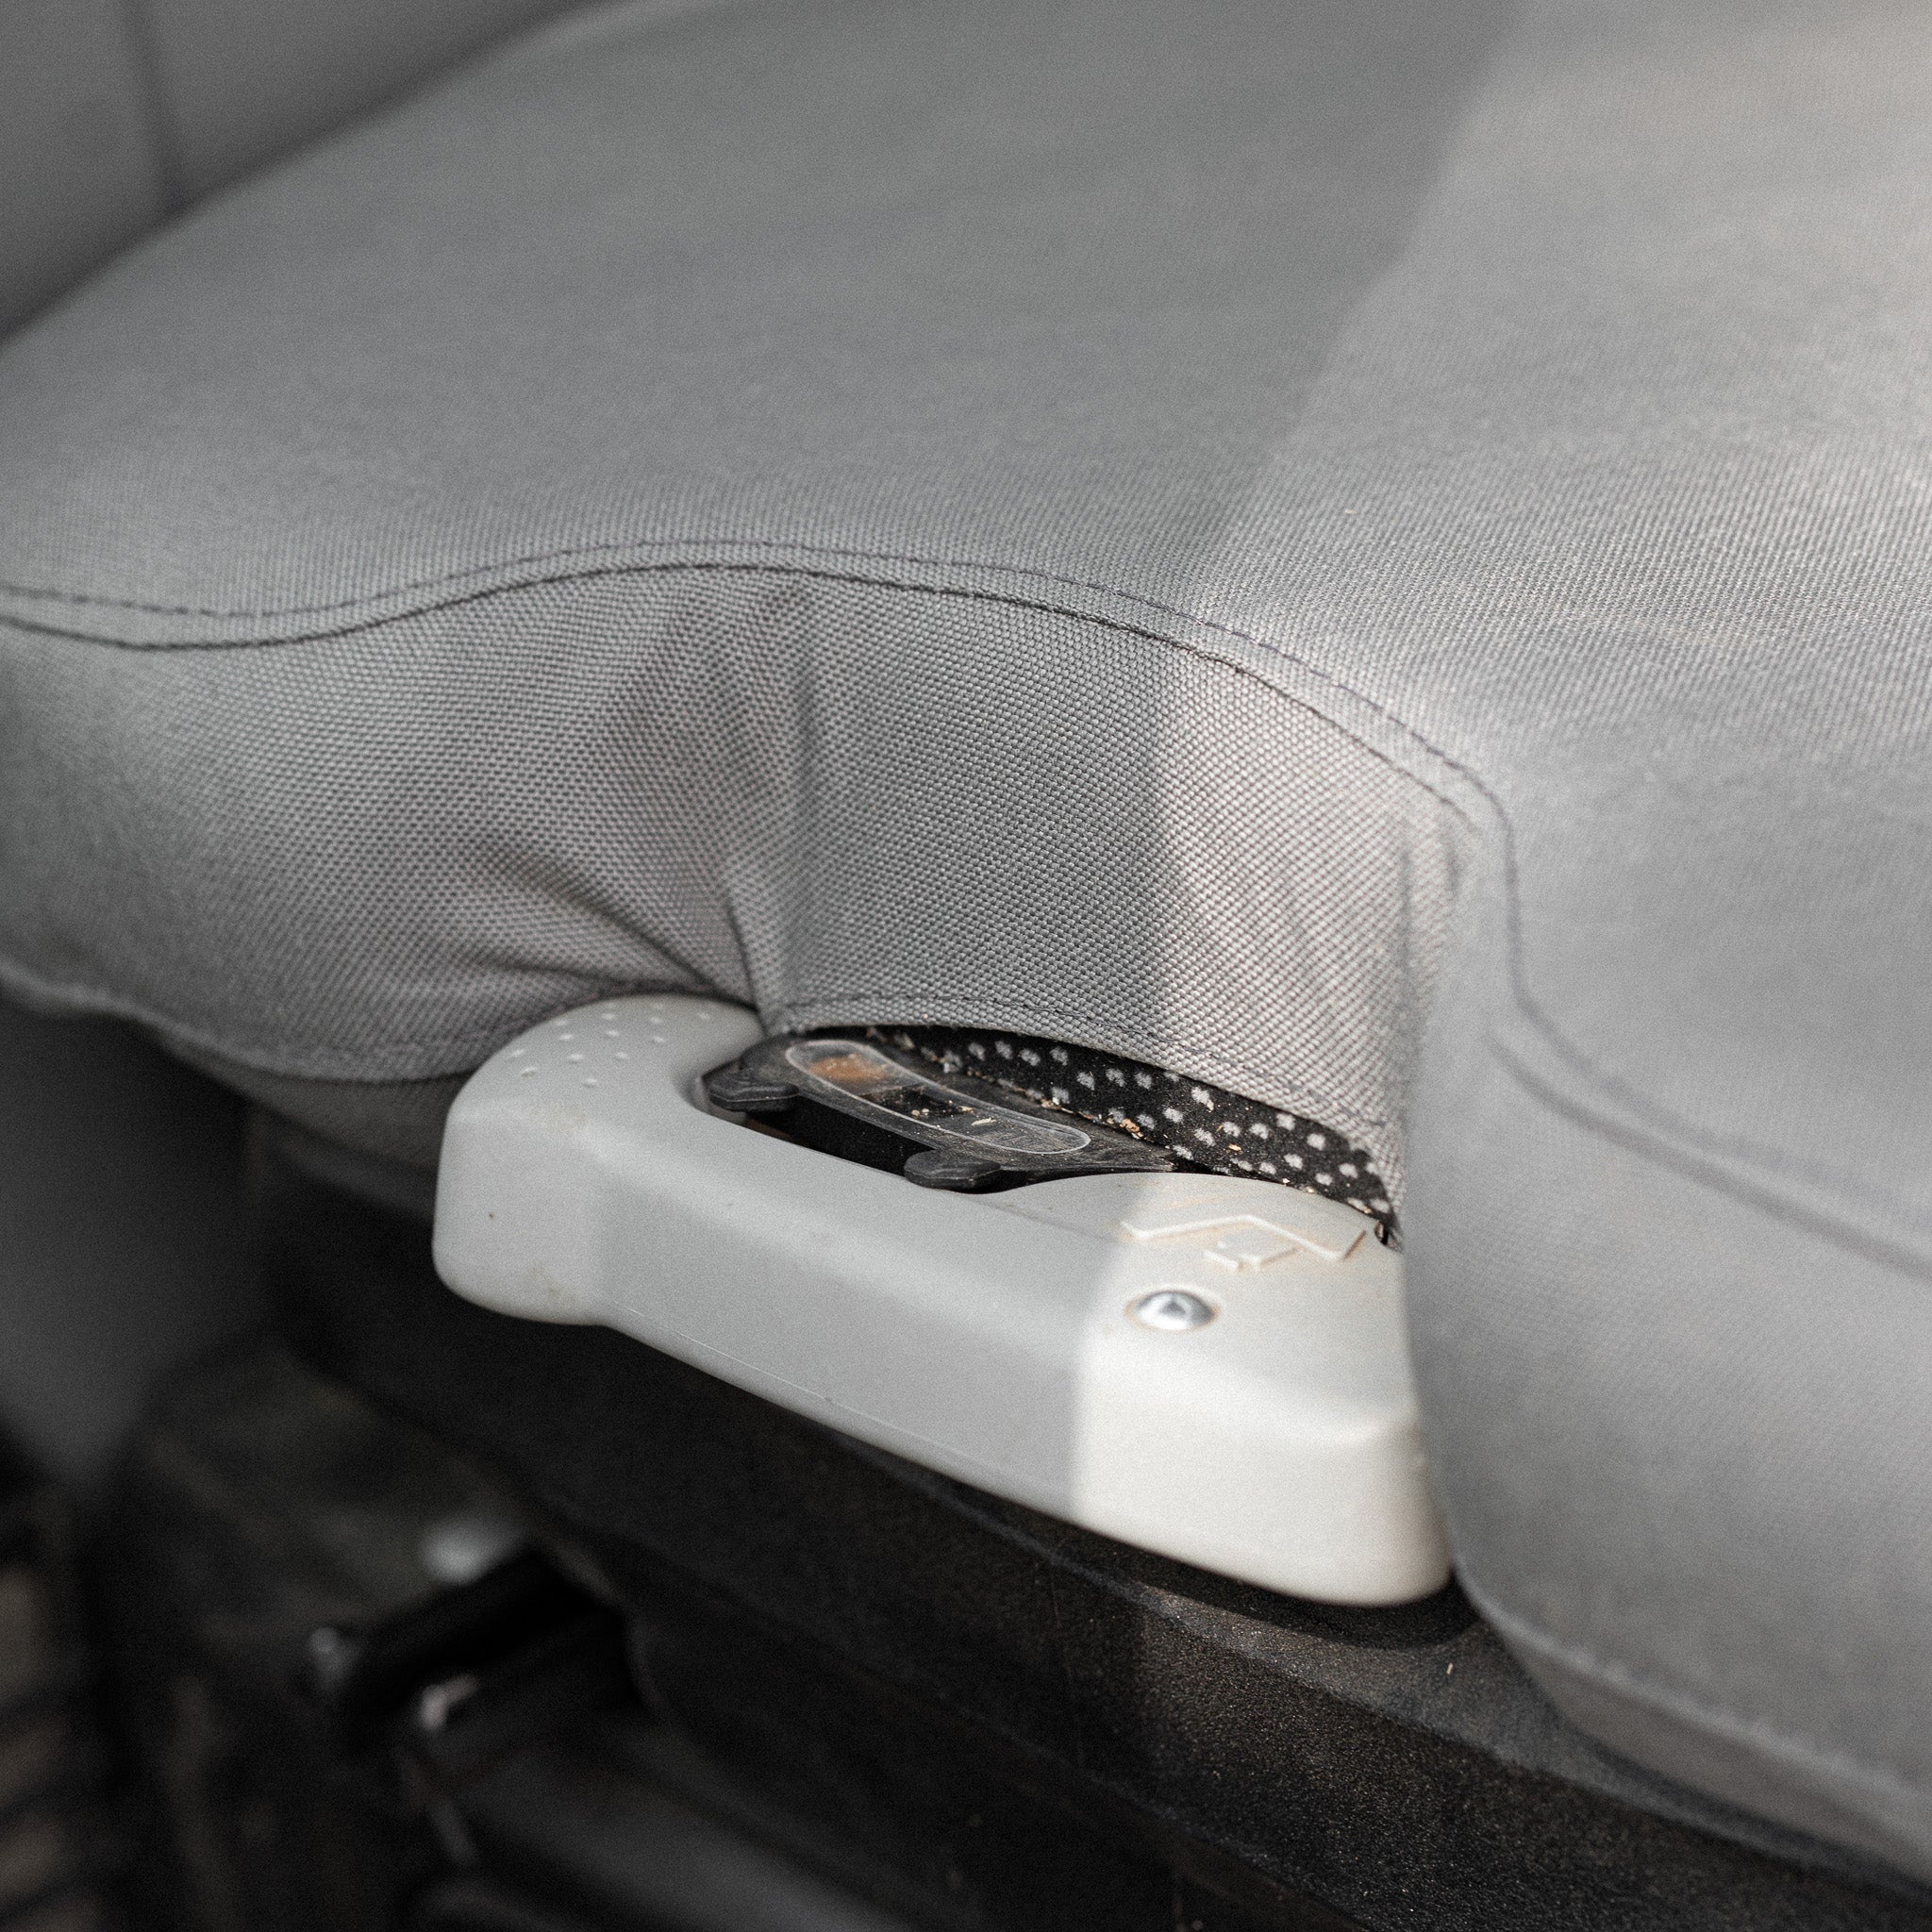 This picture shows how the seat cover fits around the adjustment handle at the front of the seat.